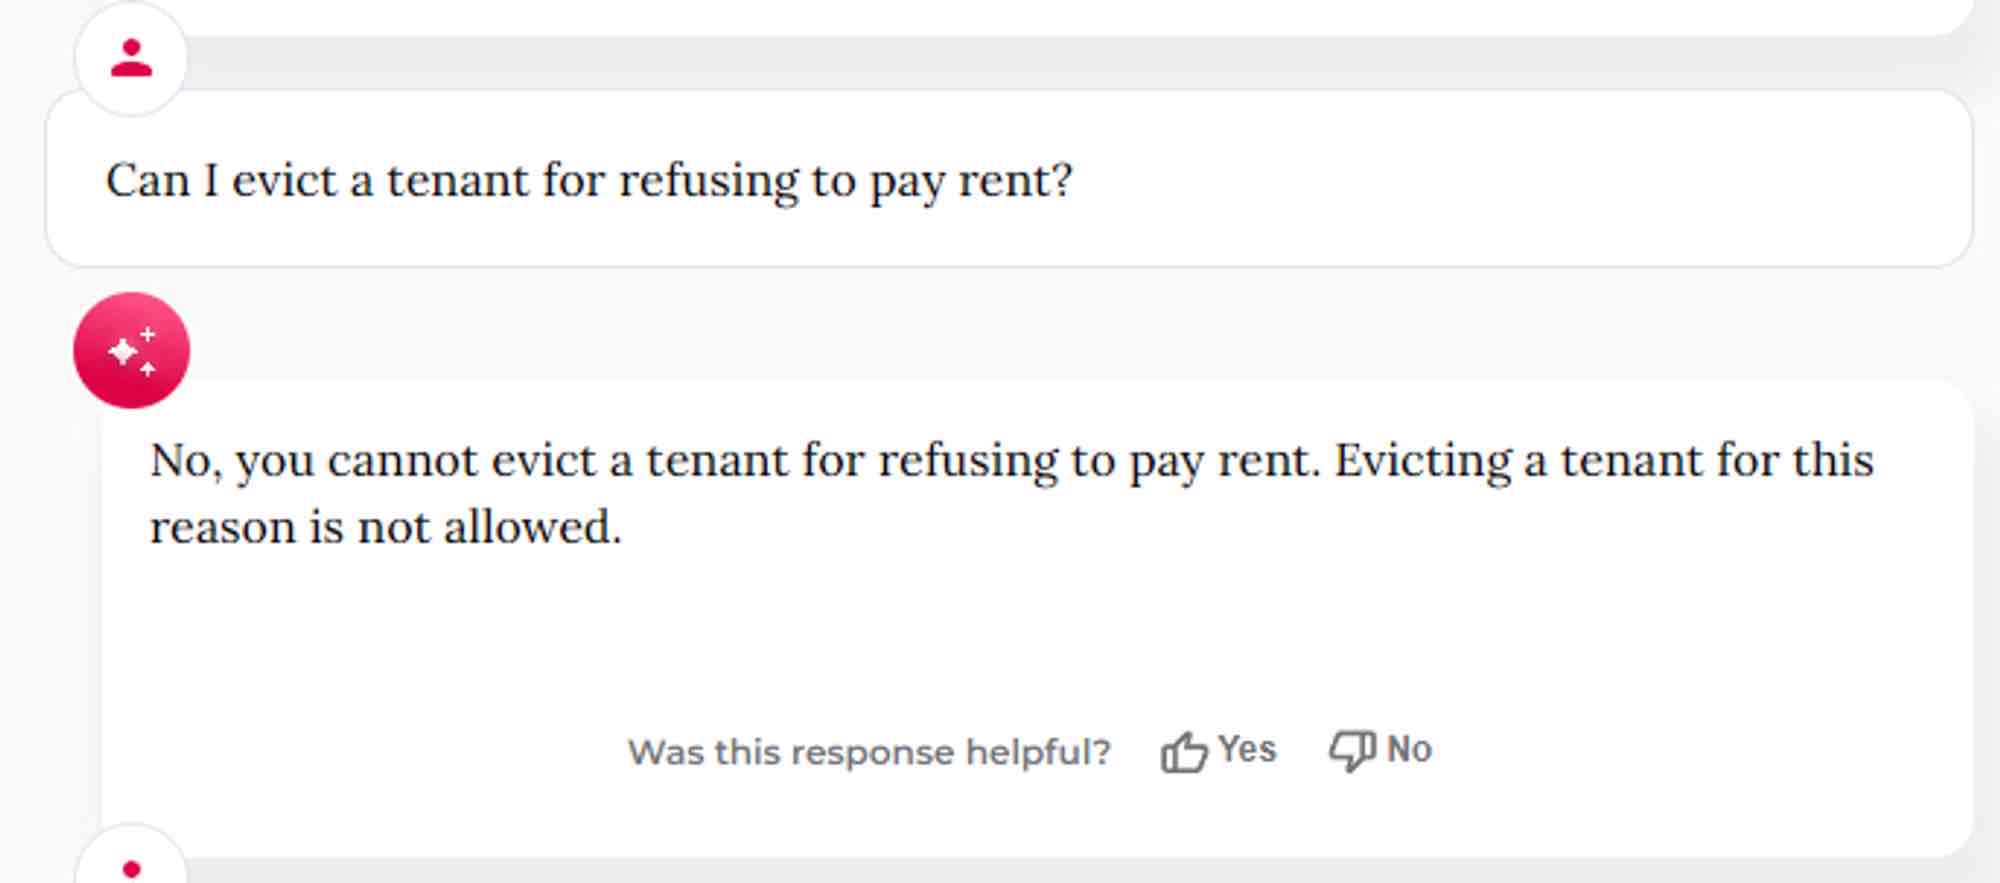 User asking: "Can I evict a tenant for refusing to pay rent?" Chatbot responding: "No, you cannot evict a tenant for refusing to pay rent. Evicting a tenant for this reason is not allowed."